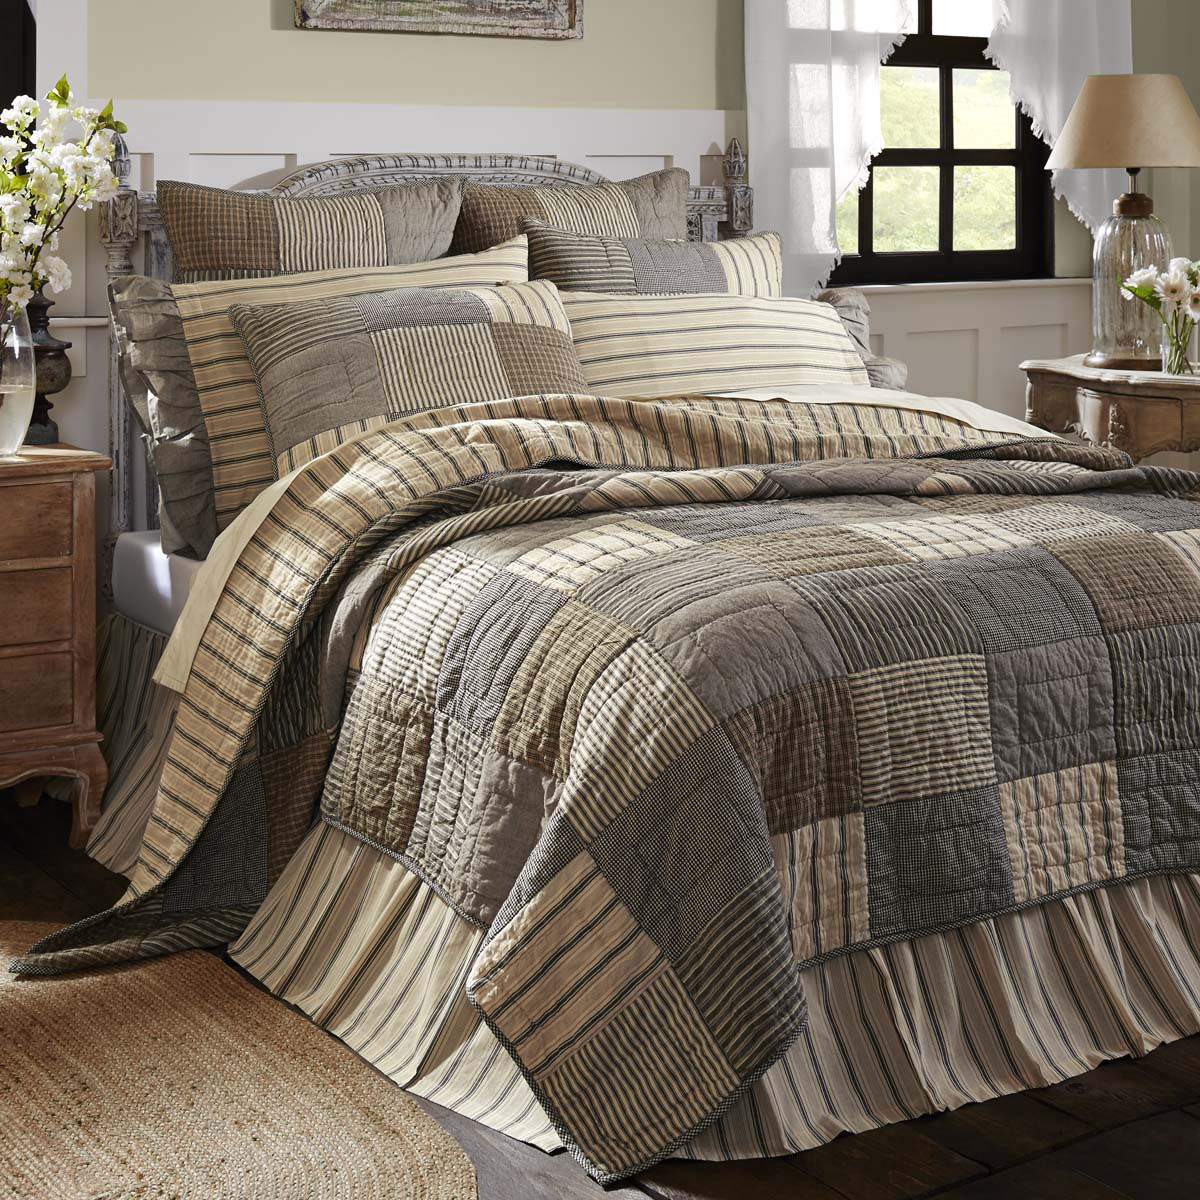 Sawyer Mill Quilt, by VHC Brands.